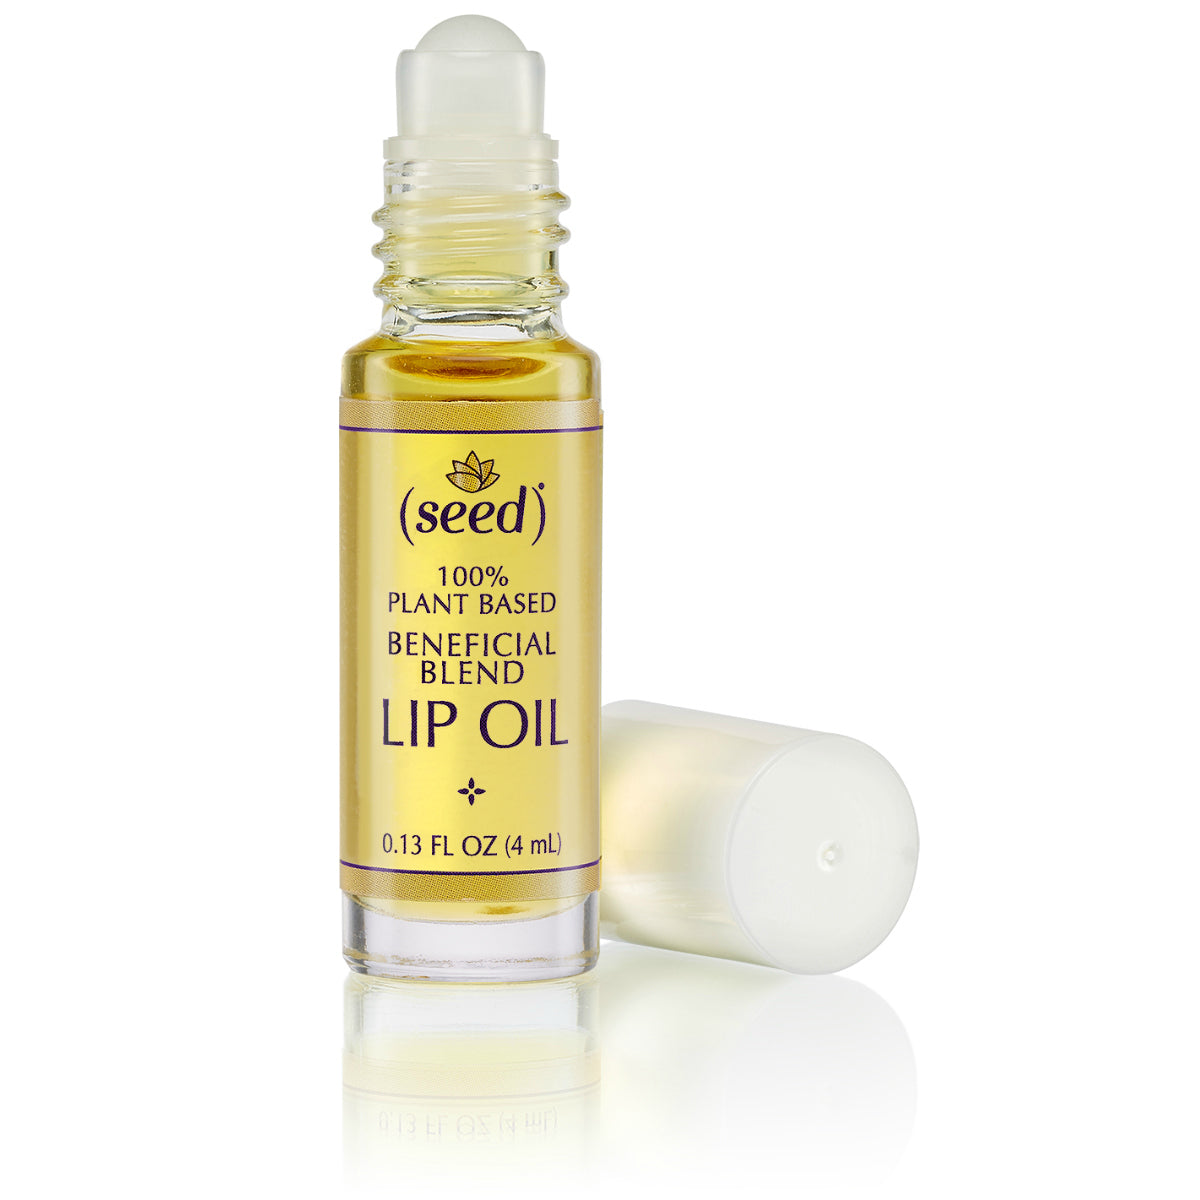 Seed Stress Relief Blend Lip Oil with lavender, patchouli, and clary sage essential oils